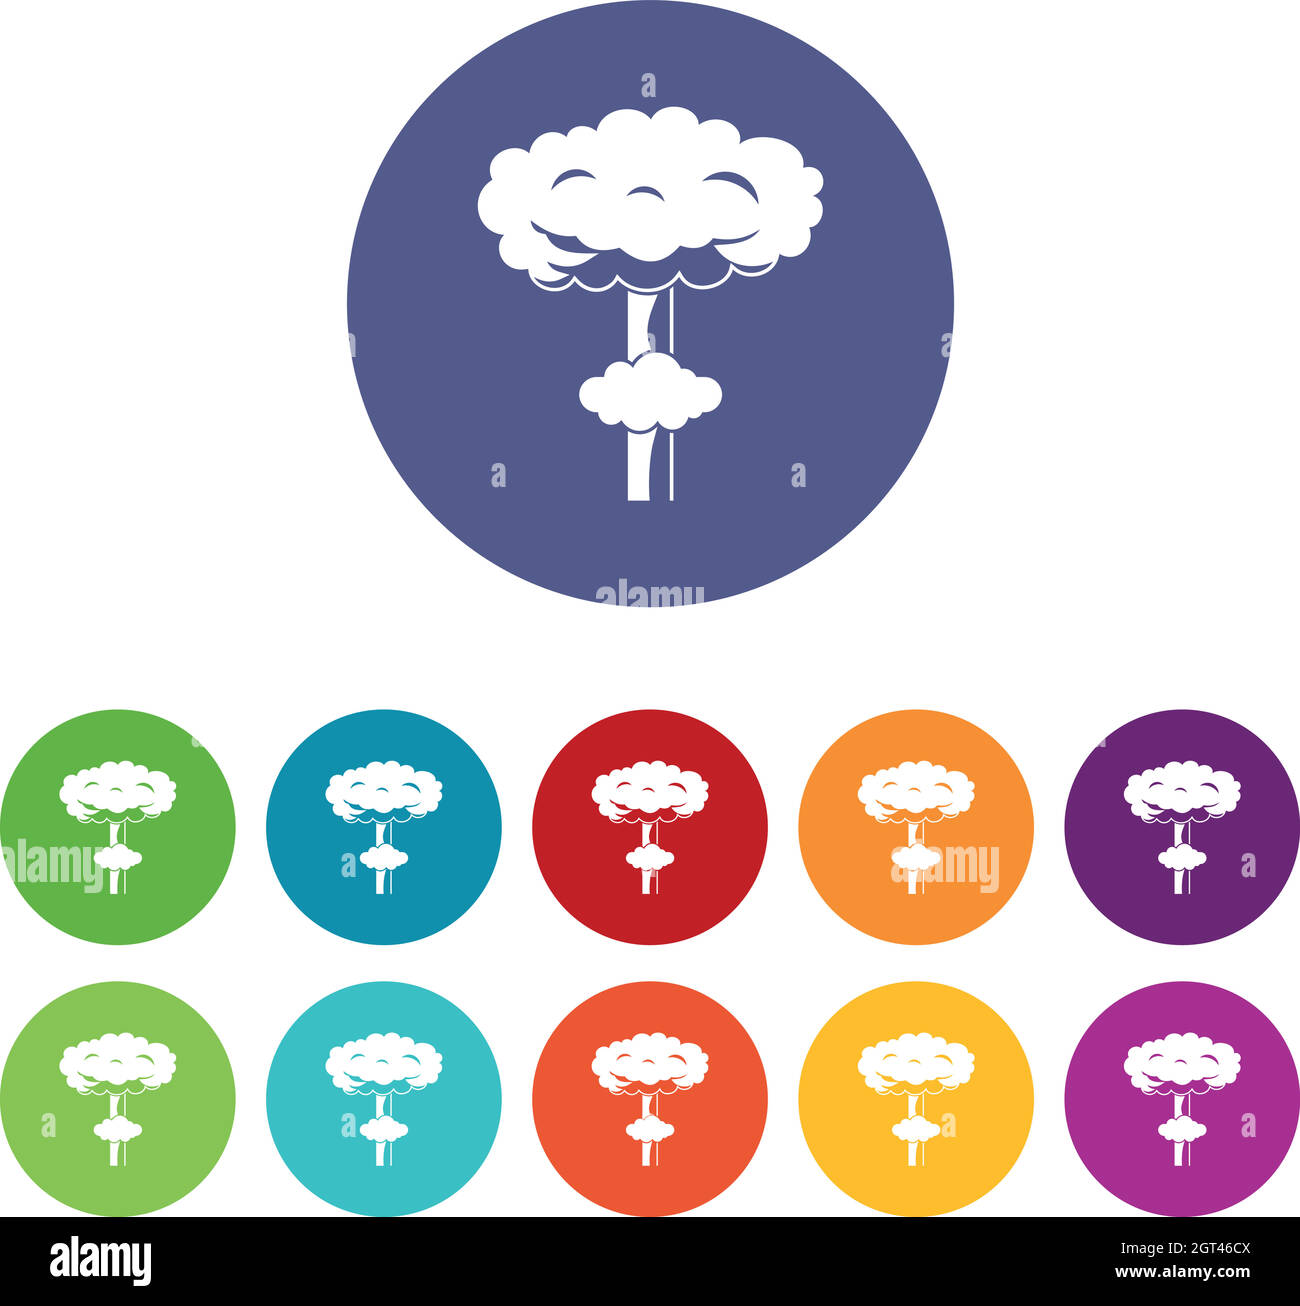 Nuclear explosion set icons Stock Vector